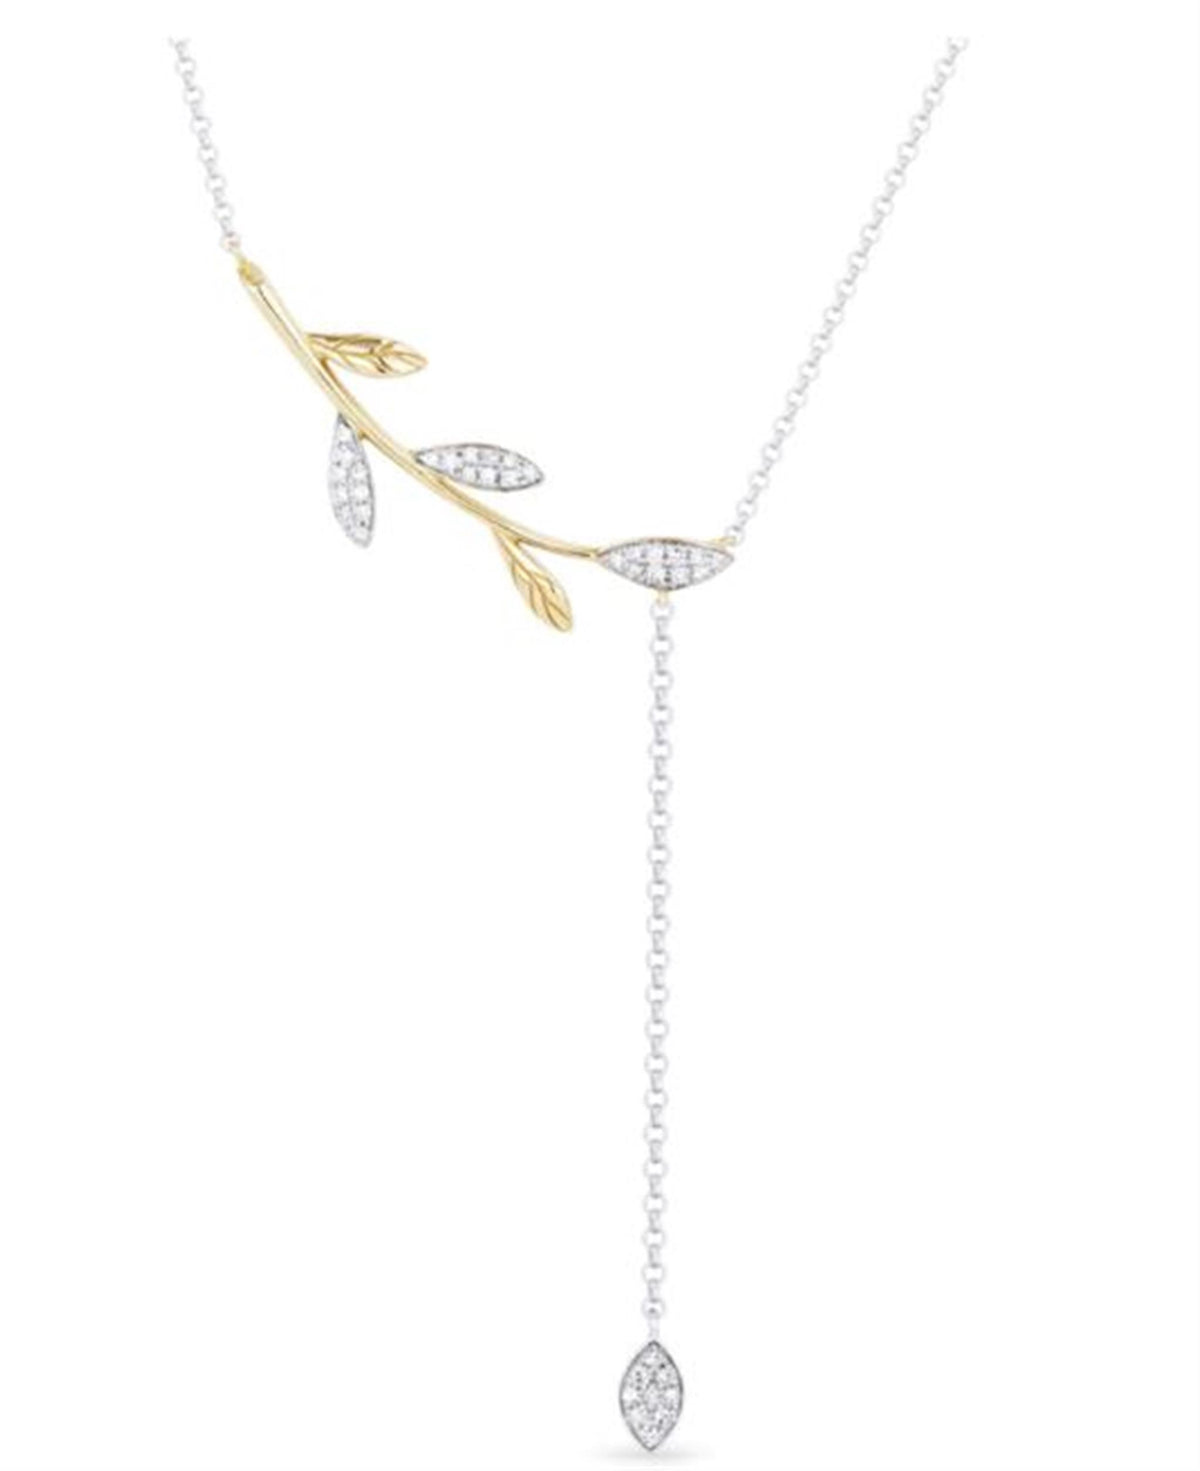 14Kt Yellow & White Gold Pendant with 0.13cttw Natural Diamonds